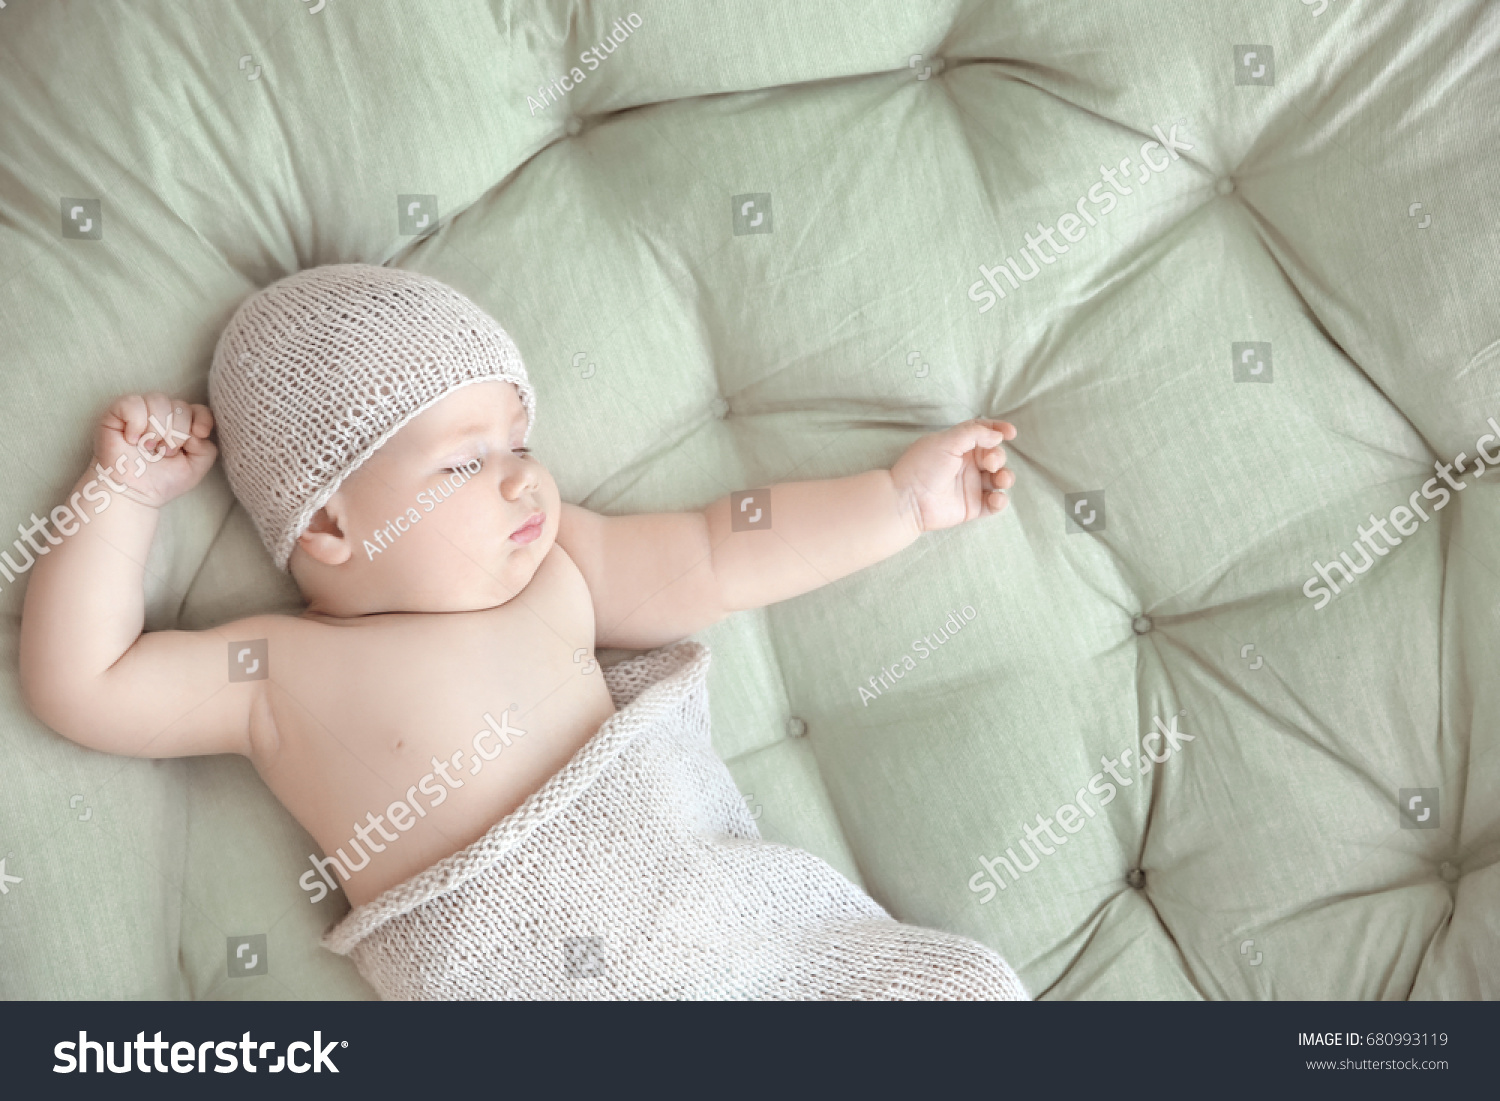 Cute little baby sleeping on lounge at home #680993119